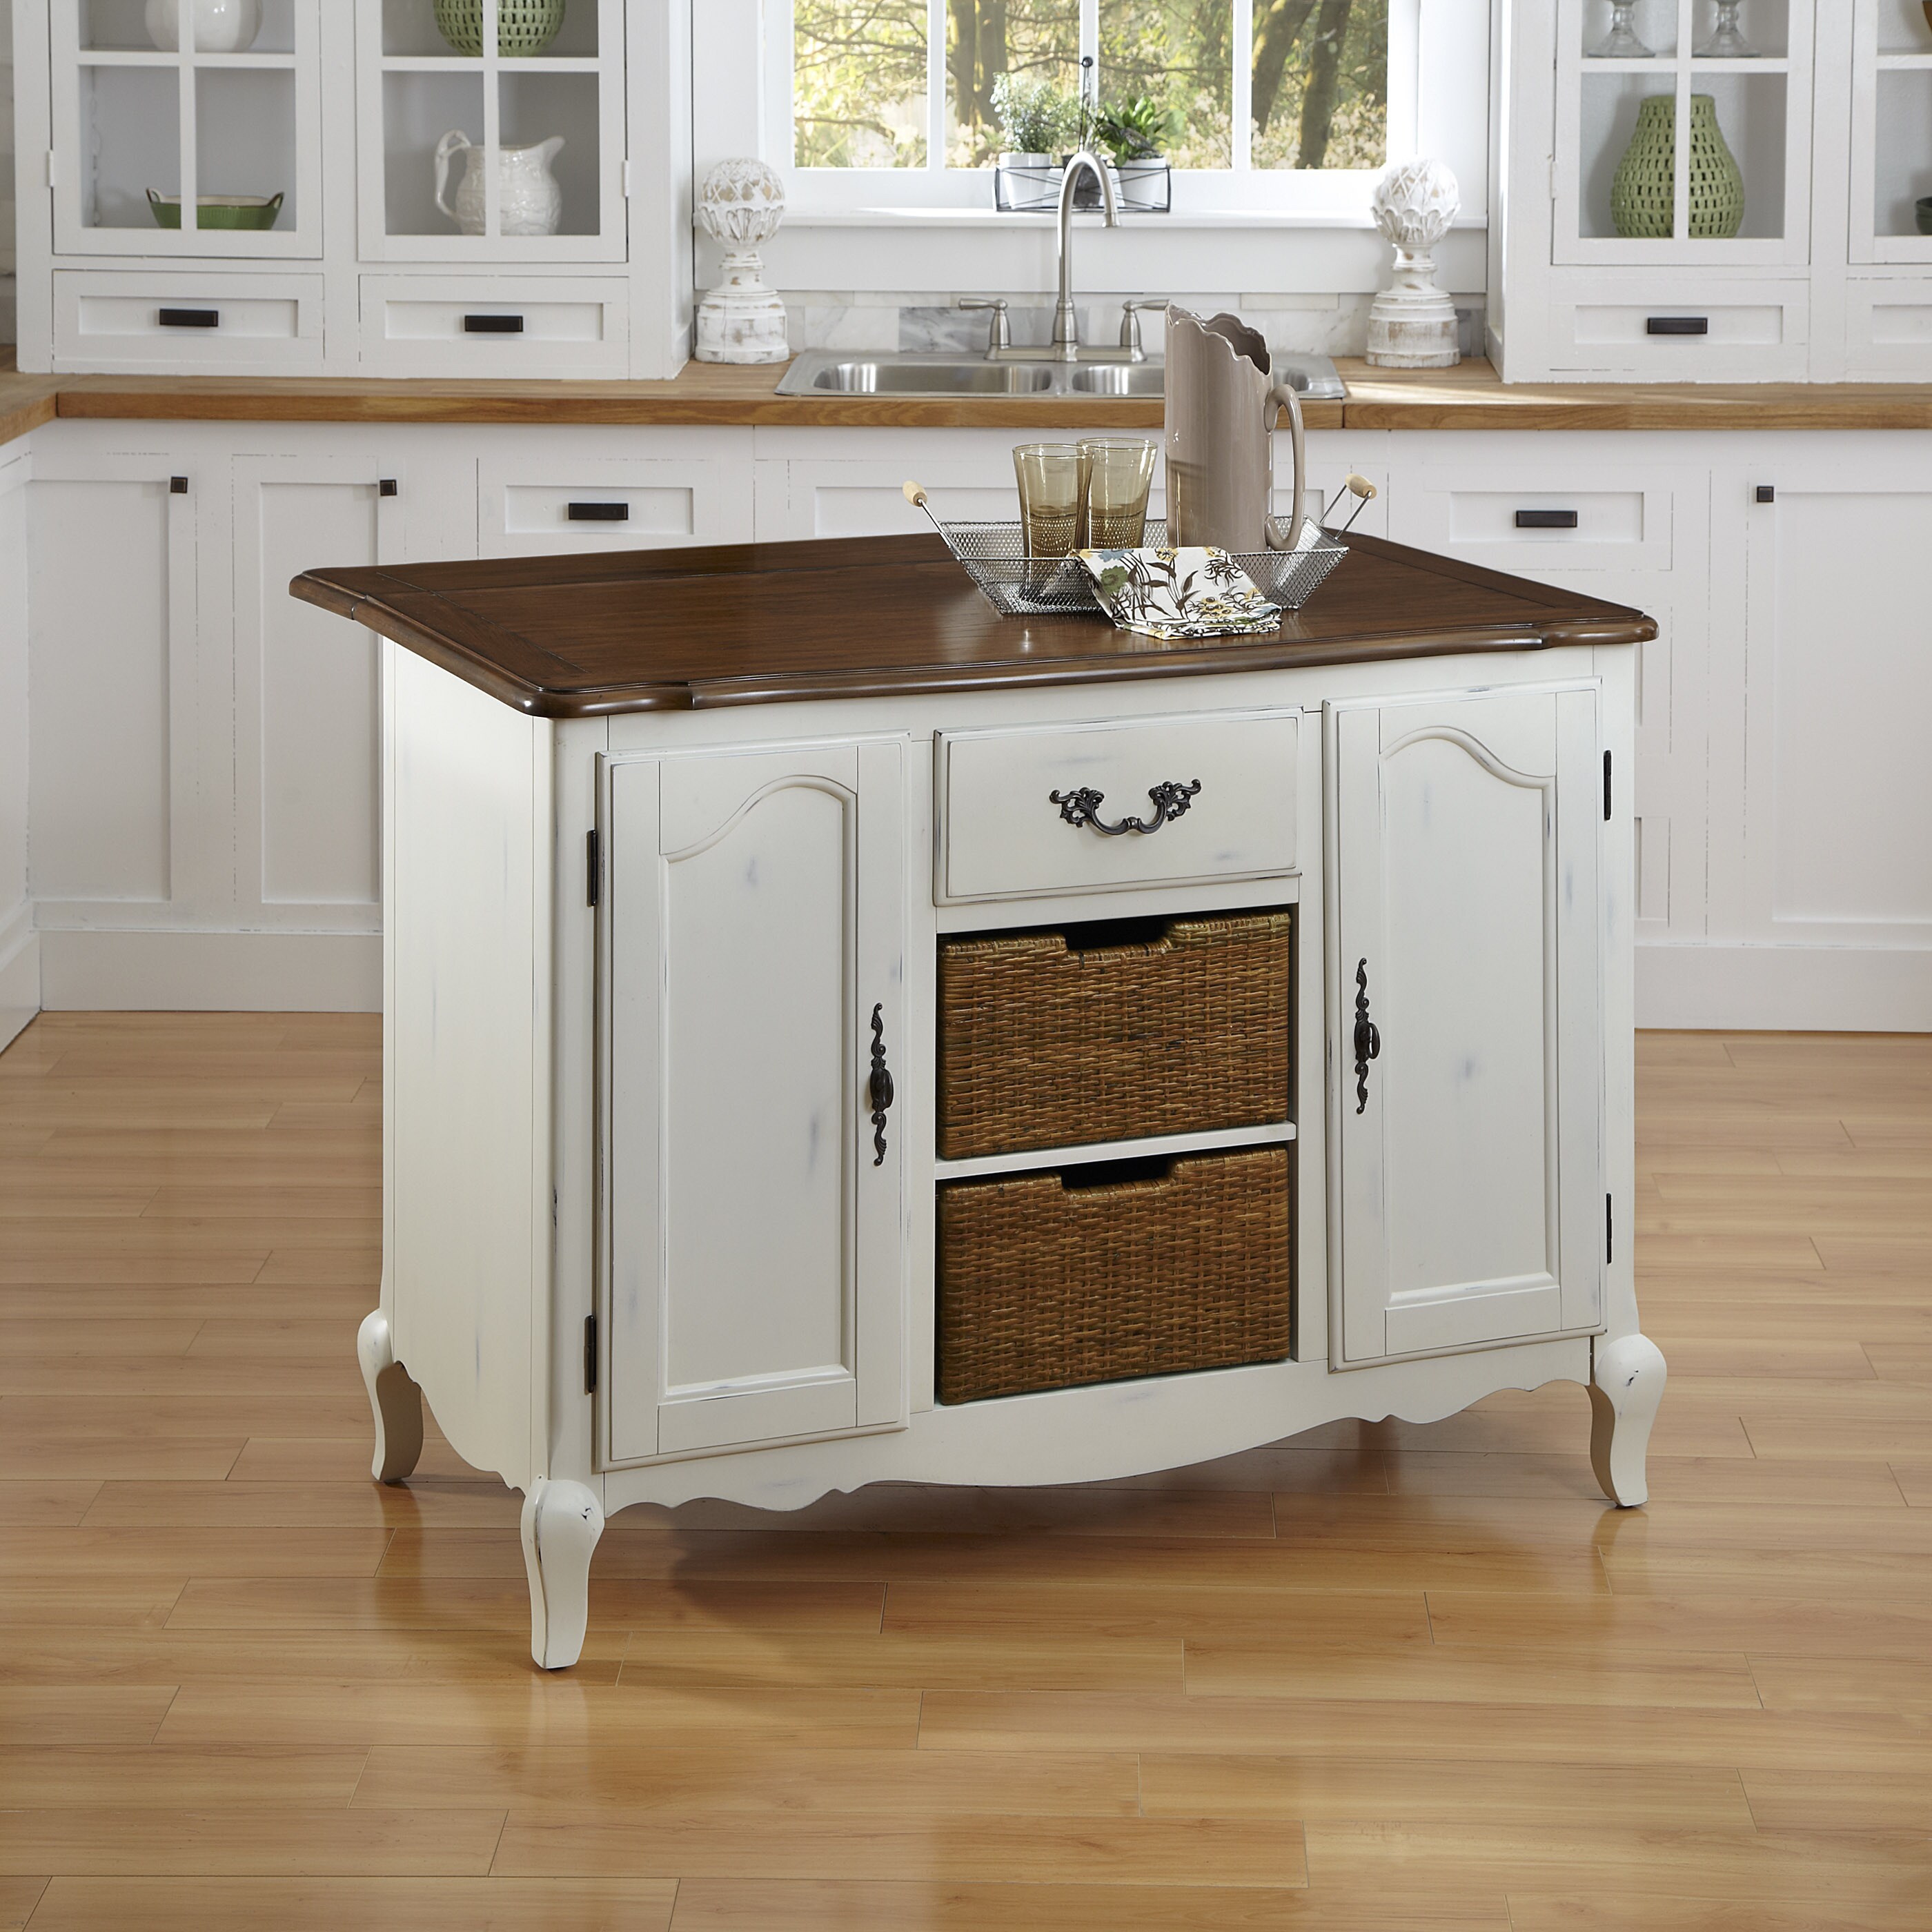 The French Countryside Kitchen Island By Home Styles Overstock 8408394